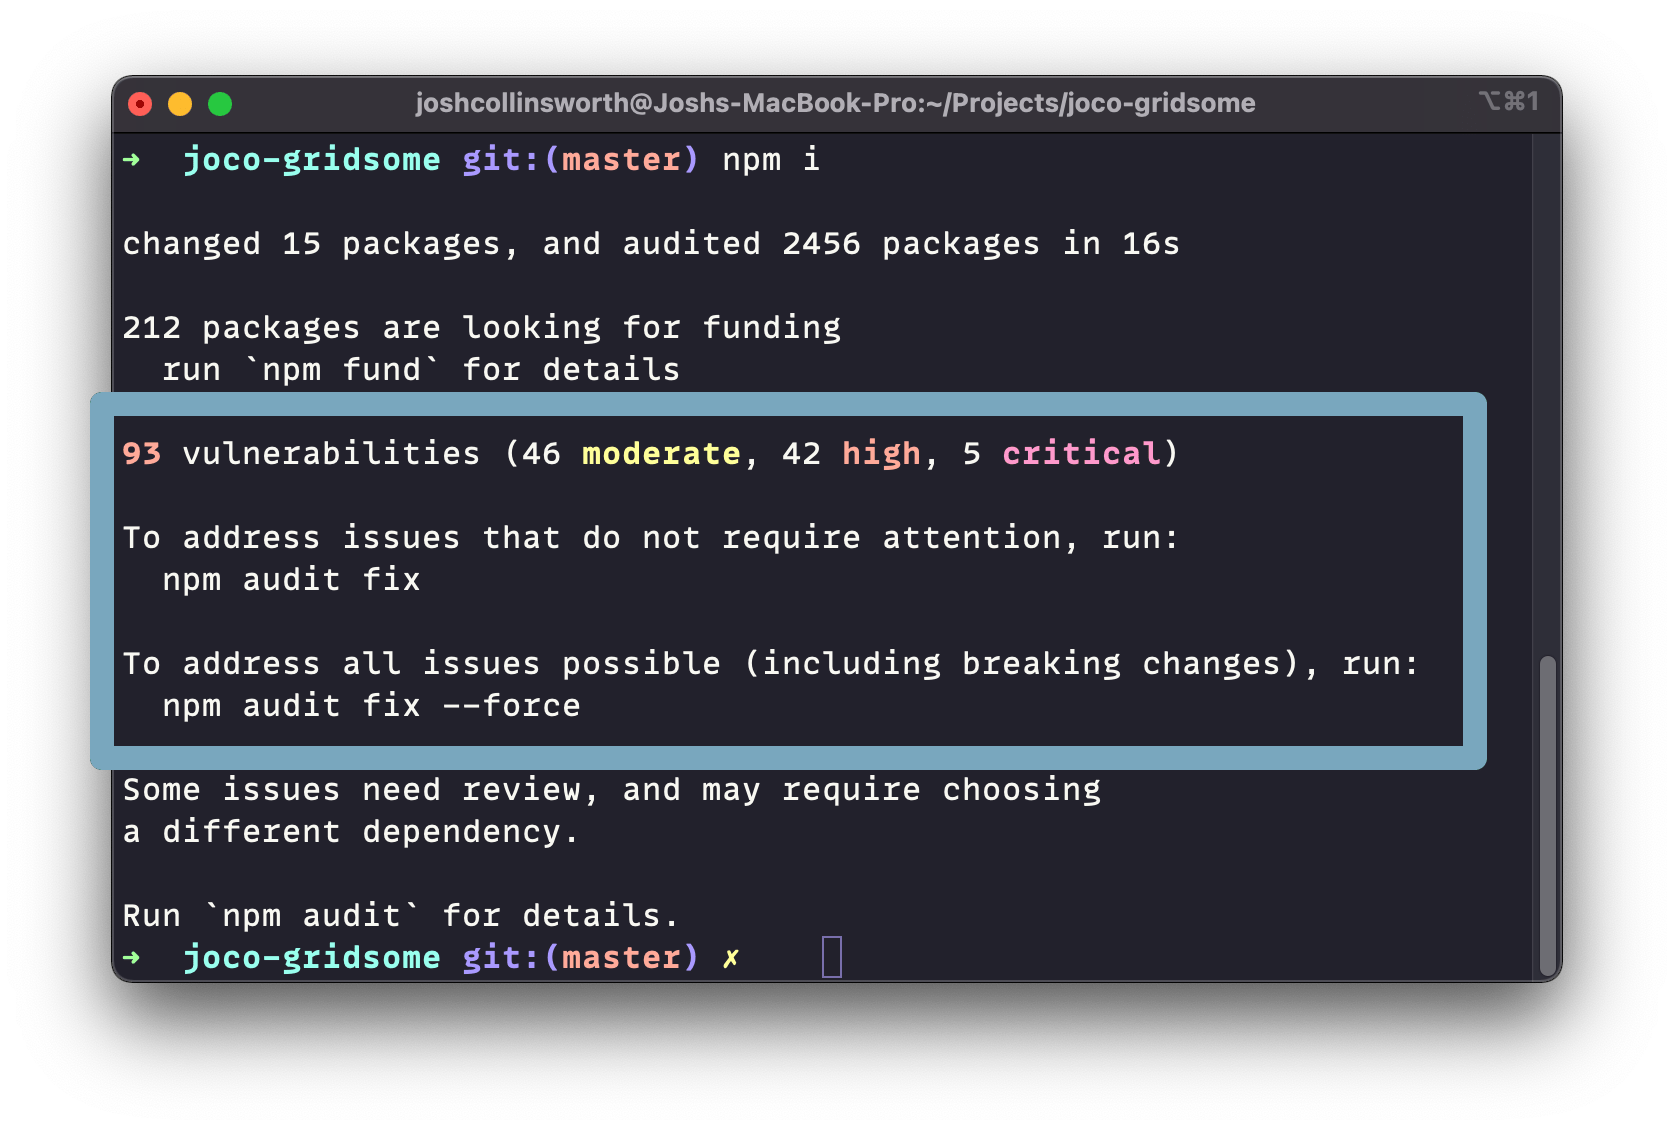 Screenshot of an open terminal window showing the process of installing npm packages with the npm i command. 212 npm packages are installed but the terminal shows there are 93 vulnerabilities, where 46 are moderate, 42 are high, and 5 are critical.